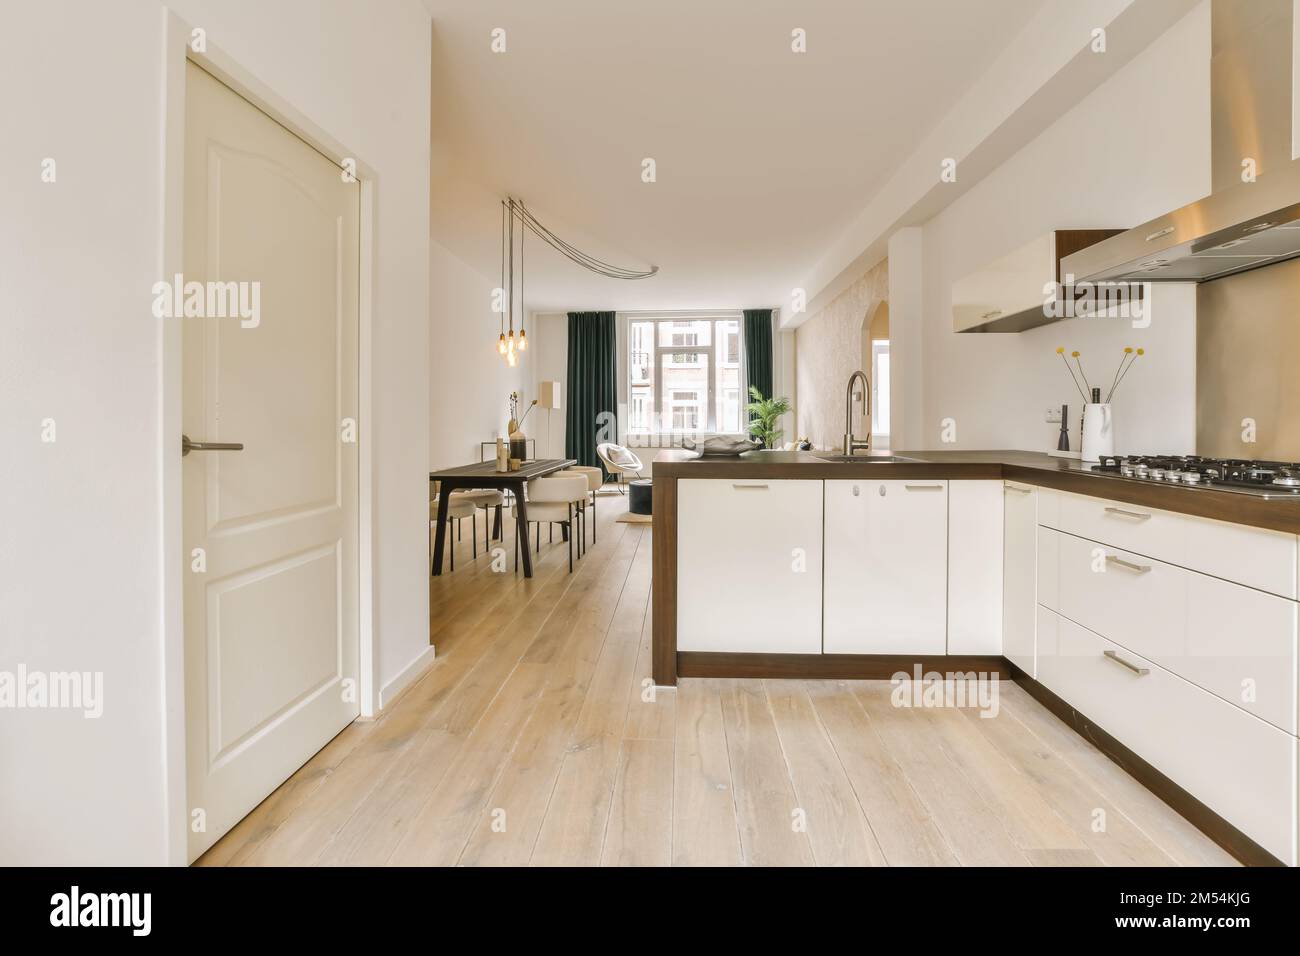 a kitchen and dining area in a house with wood flooring, white cabinets and counters on either sides Stock Photo